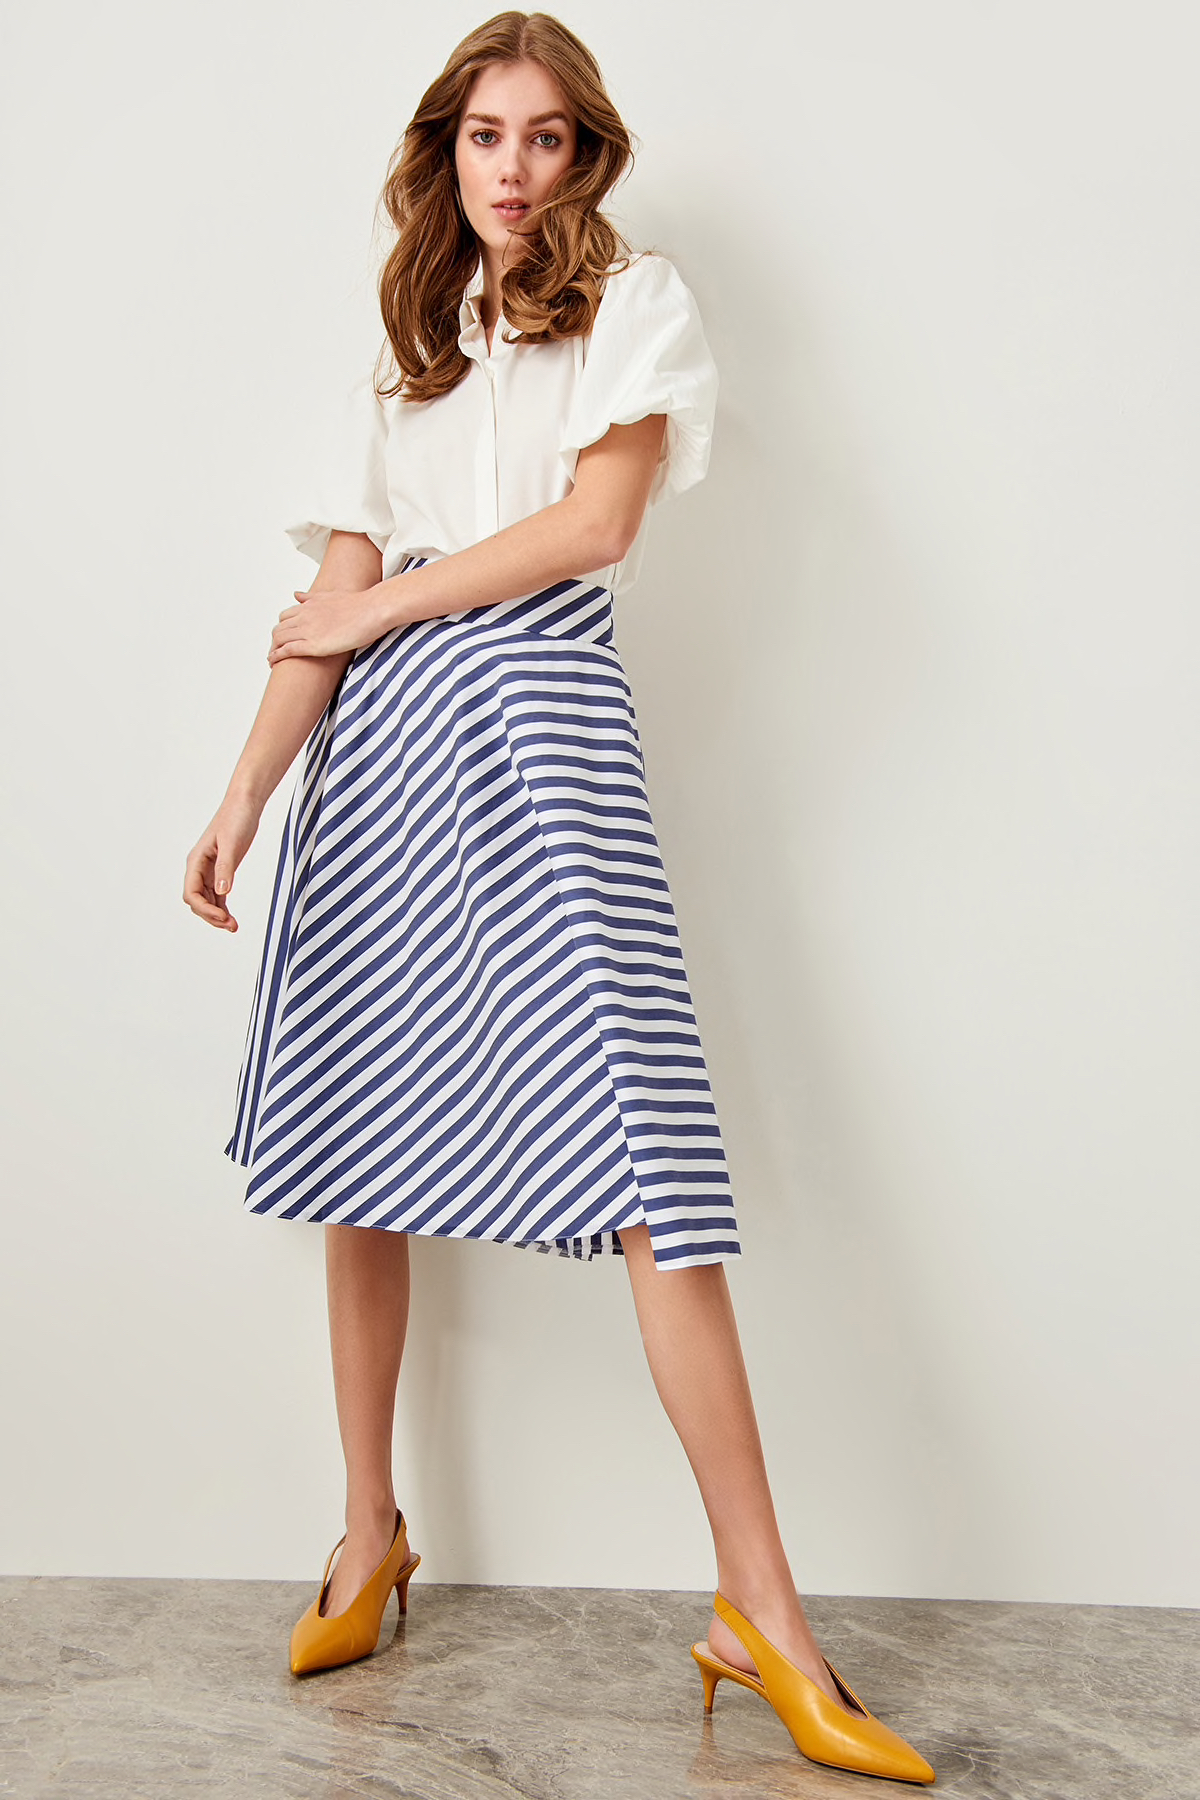 White Striped Skirt | Style Limits